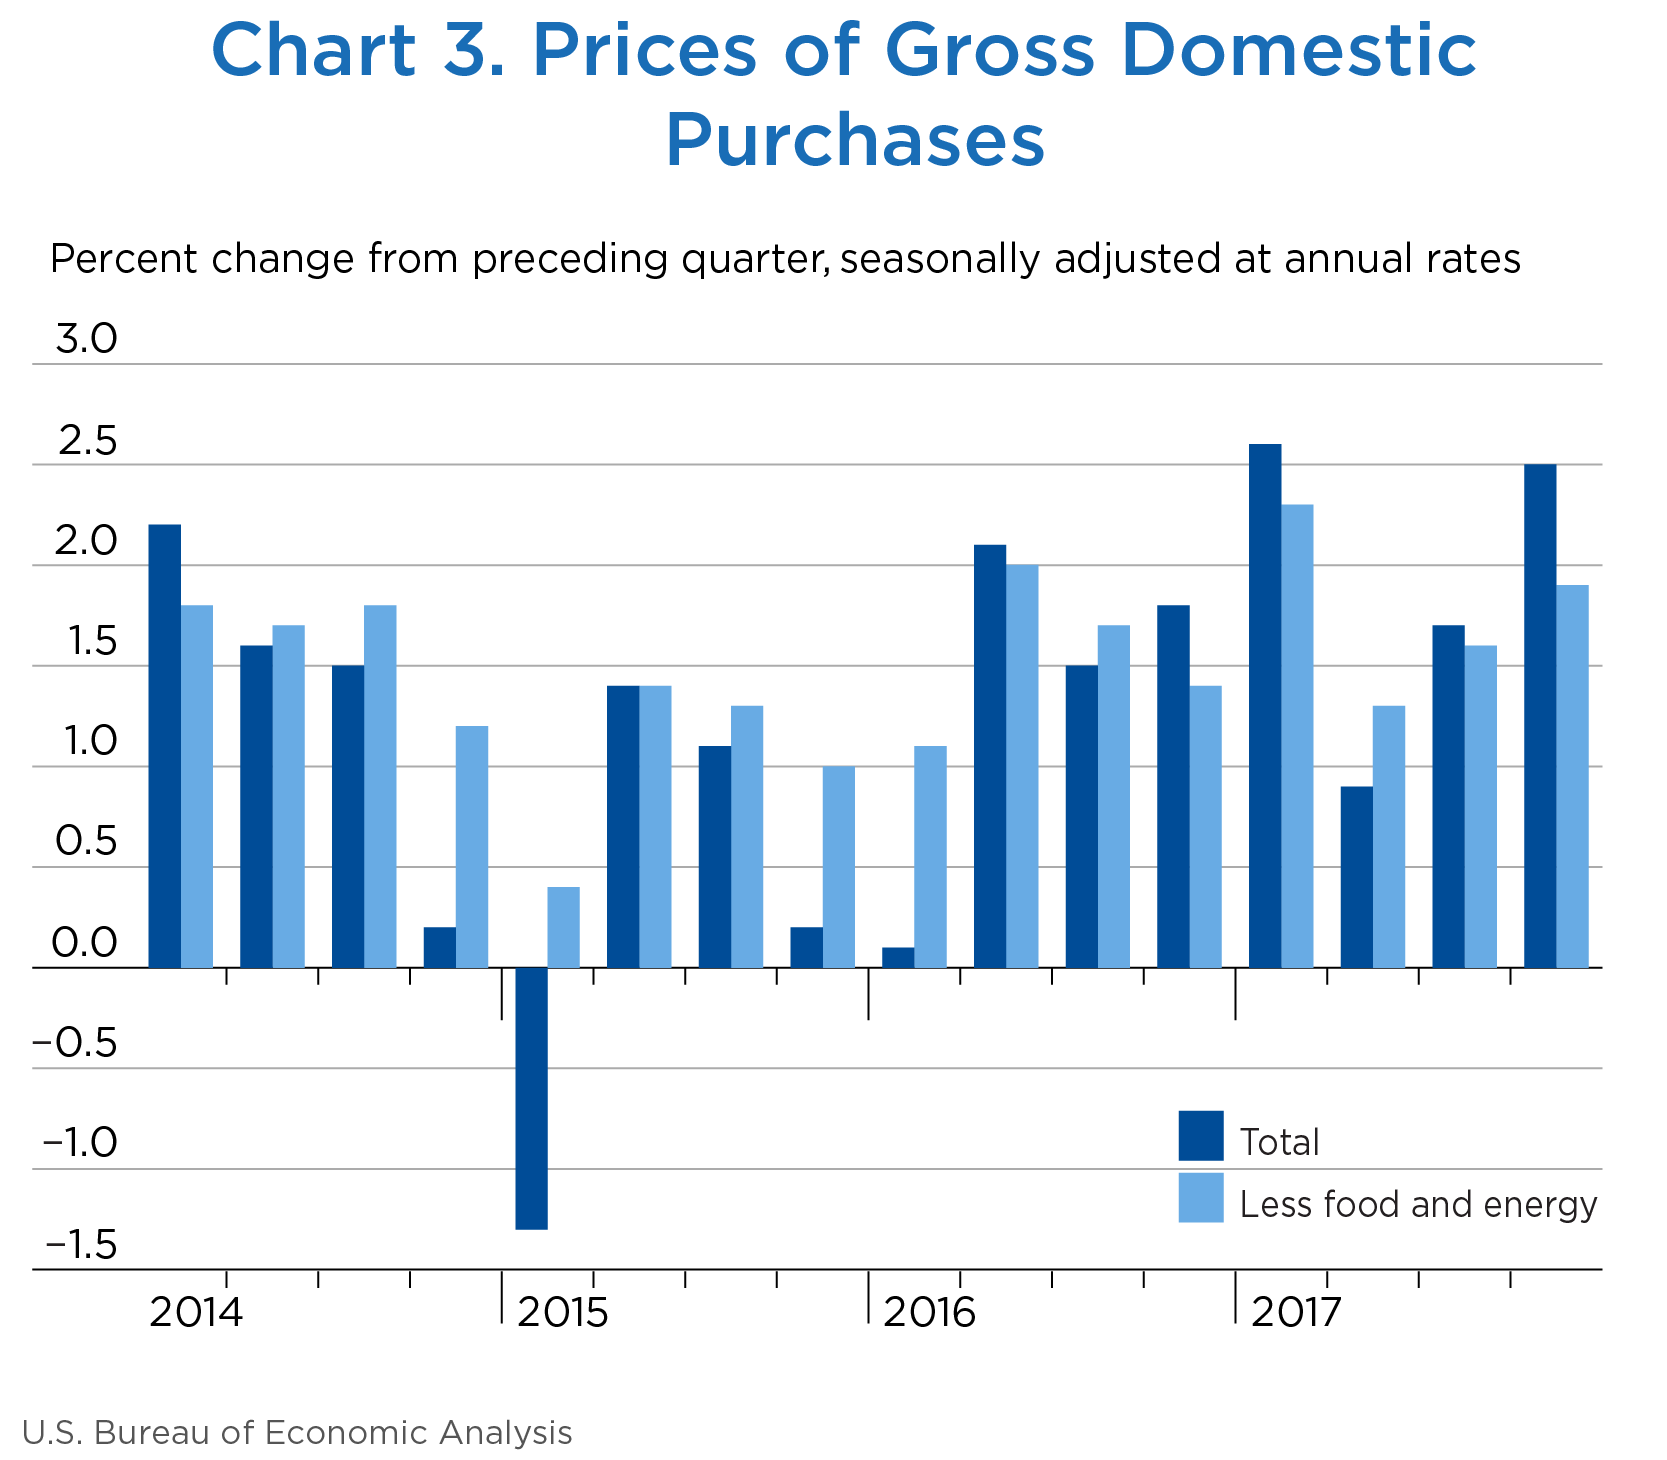 Chart 3. Prices of Gross Domestic Purchases, Bar Chart